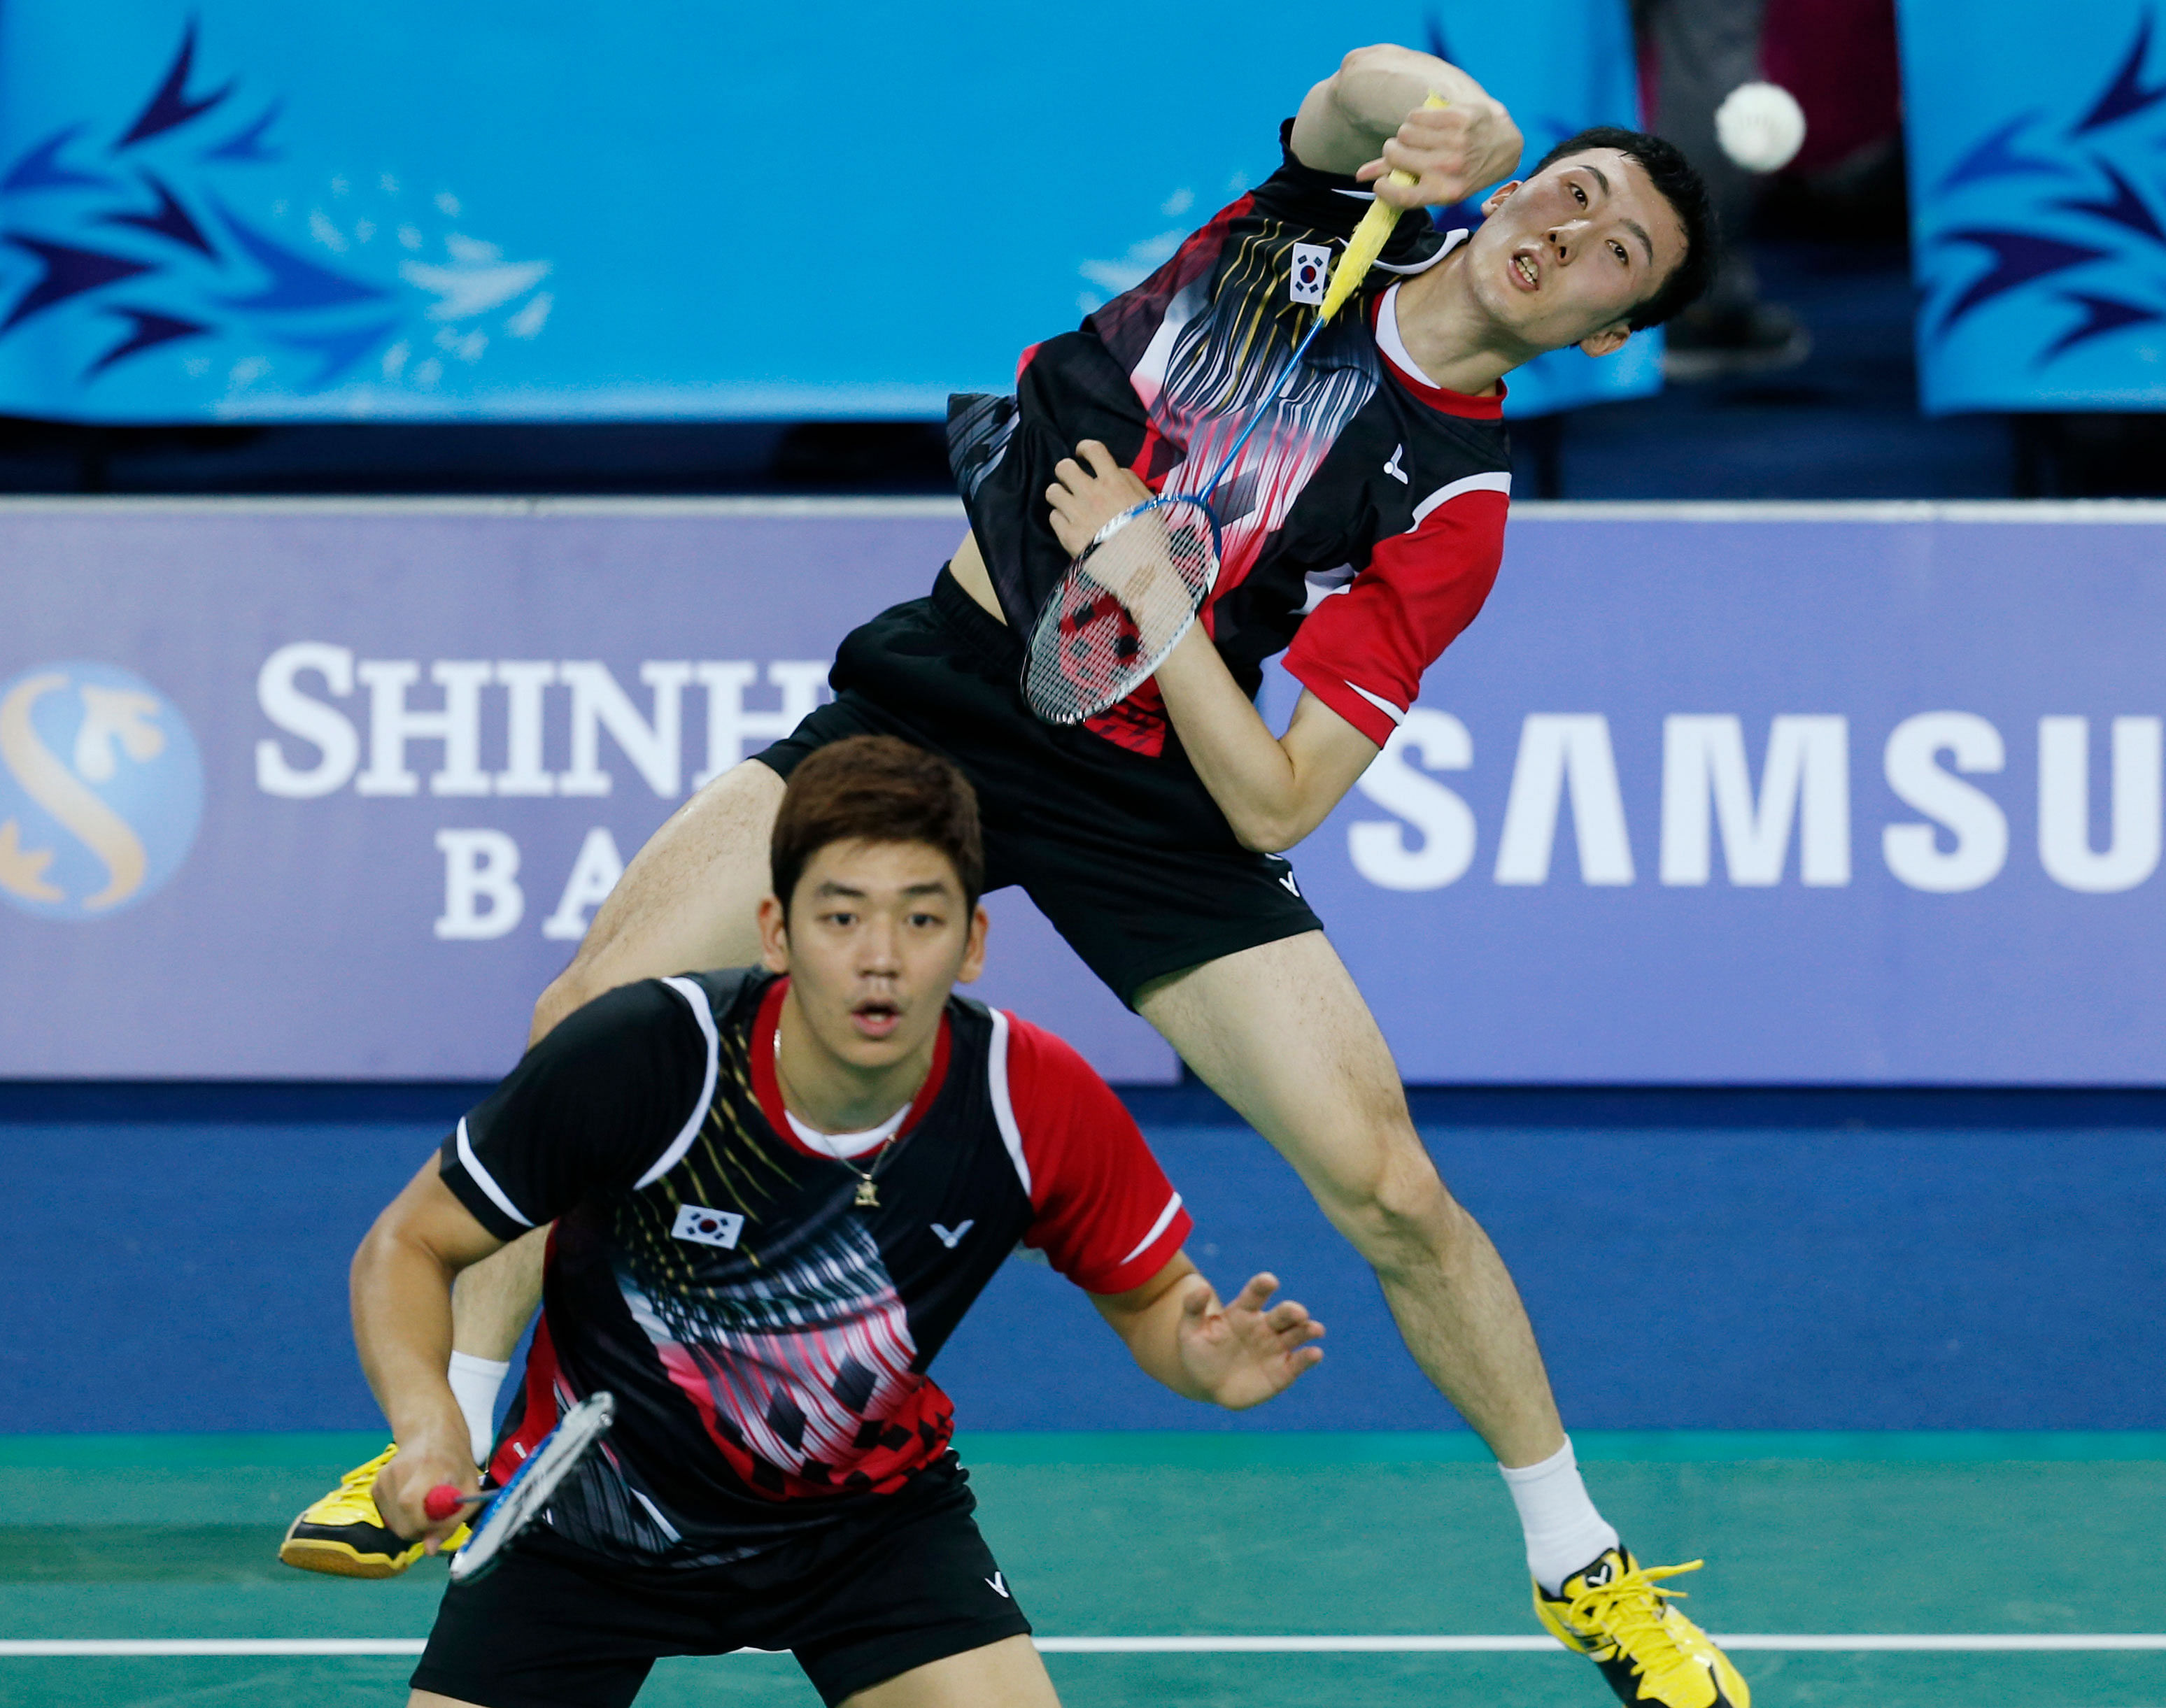 South Korea's Yoo Yeonseong, back, and Lee Yongdae return a shot to India 's Sumeeth Reddy Buss and Manu Attri during the Men's Badminton team round of 16 match at the 17th Asian Games in Incheon, South Korea Saturday, Sept. 20, 2014. AP Photo